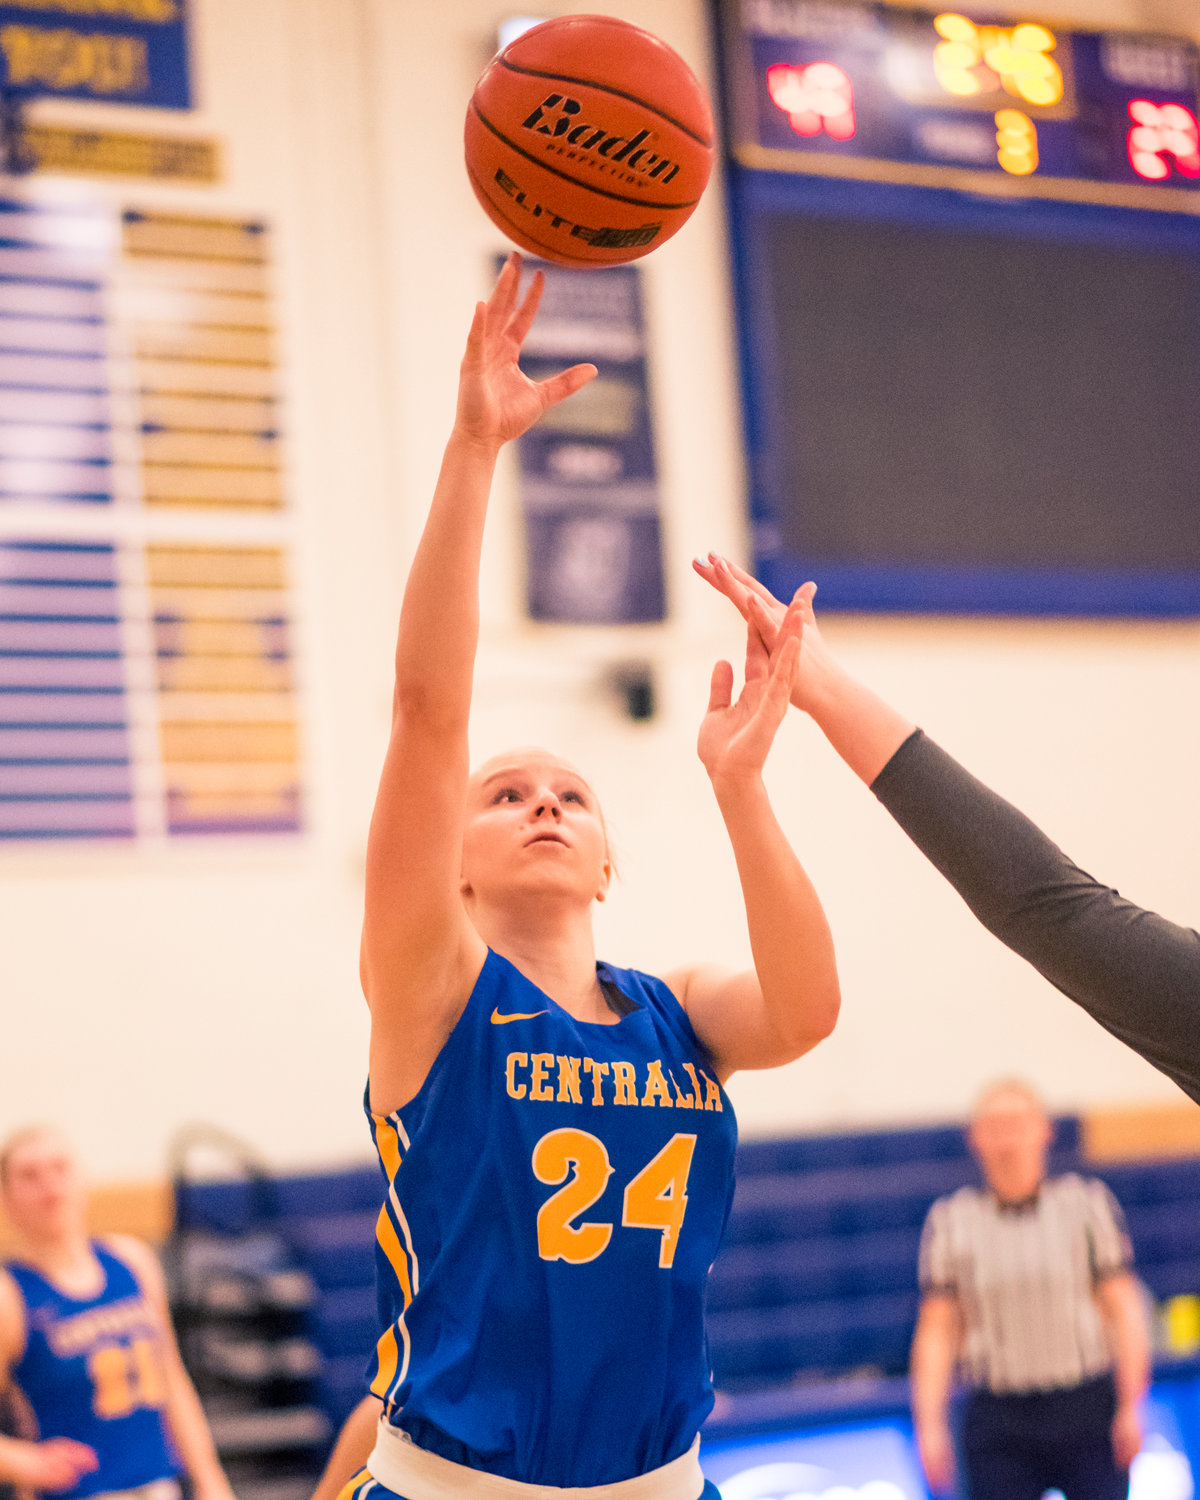 Centralia's Chloe Narolski (24) puts up a shot during a women's basketball game against S.P.S.C.C Wednesday night at Centralia College.